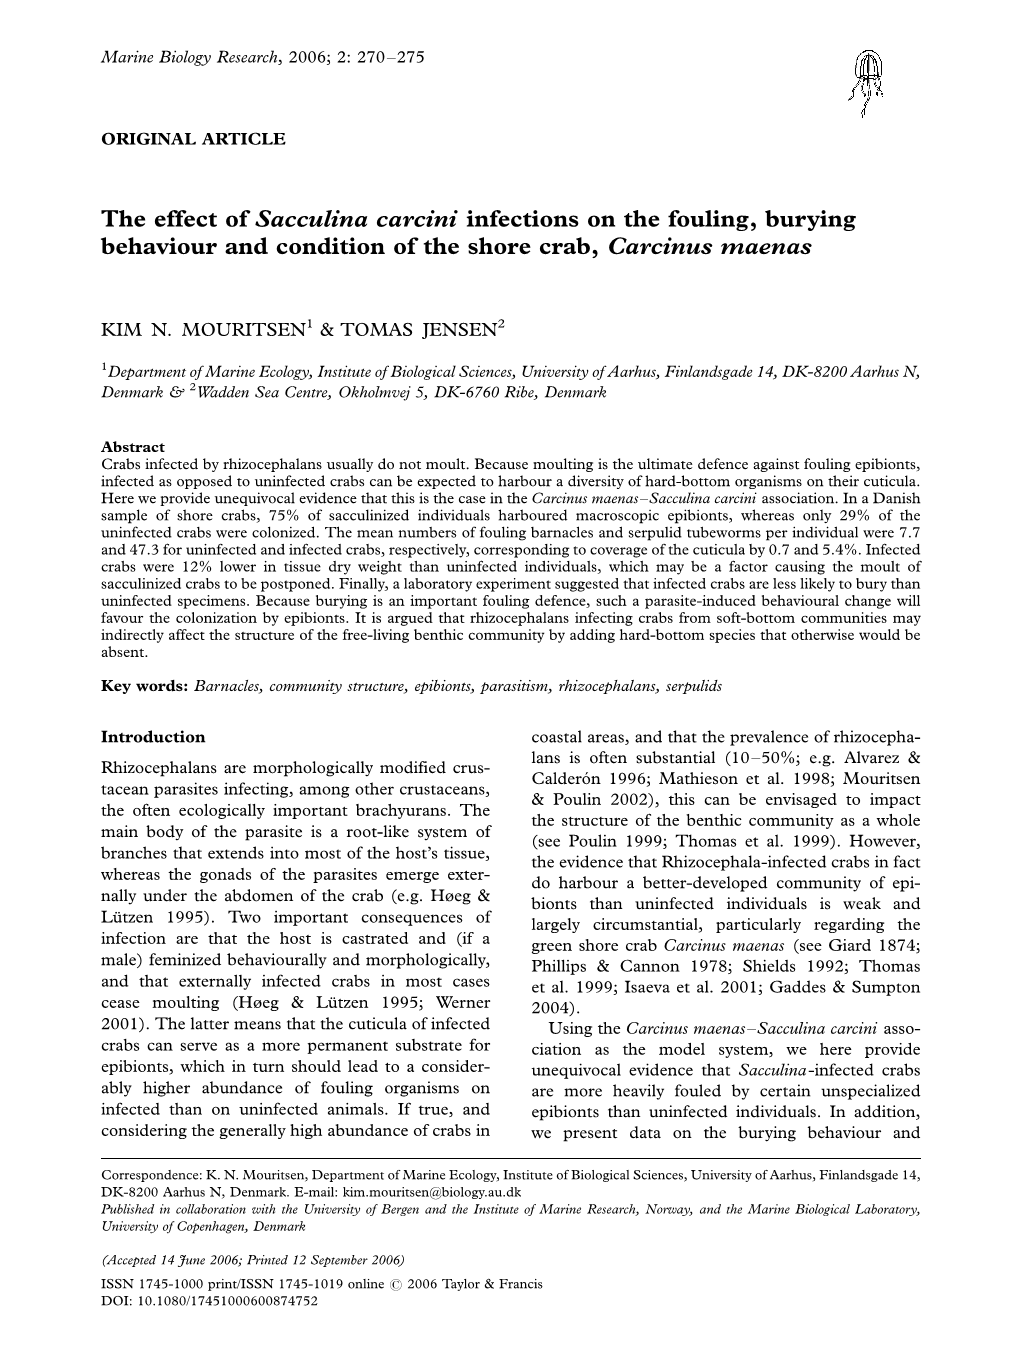 The Effect of Sacculina Carcini Infections on the Fouling, Burying Behaviour and Condition of the Shore Crab, Carcinus Maenas